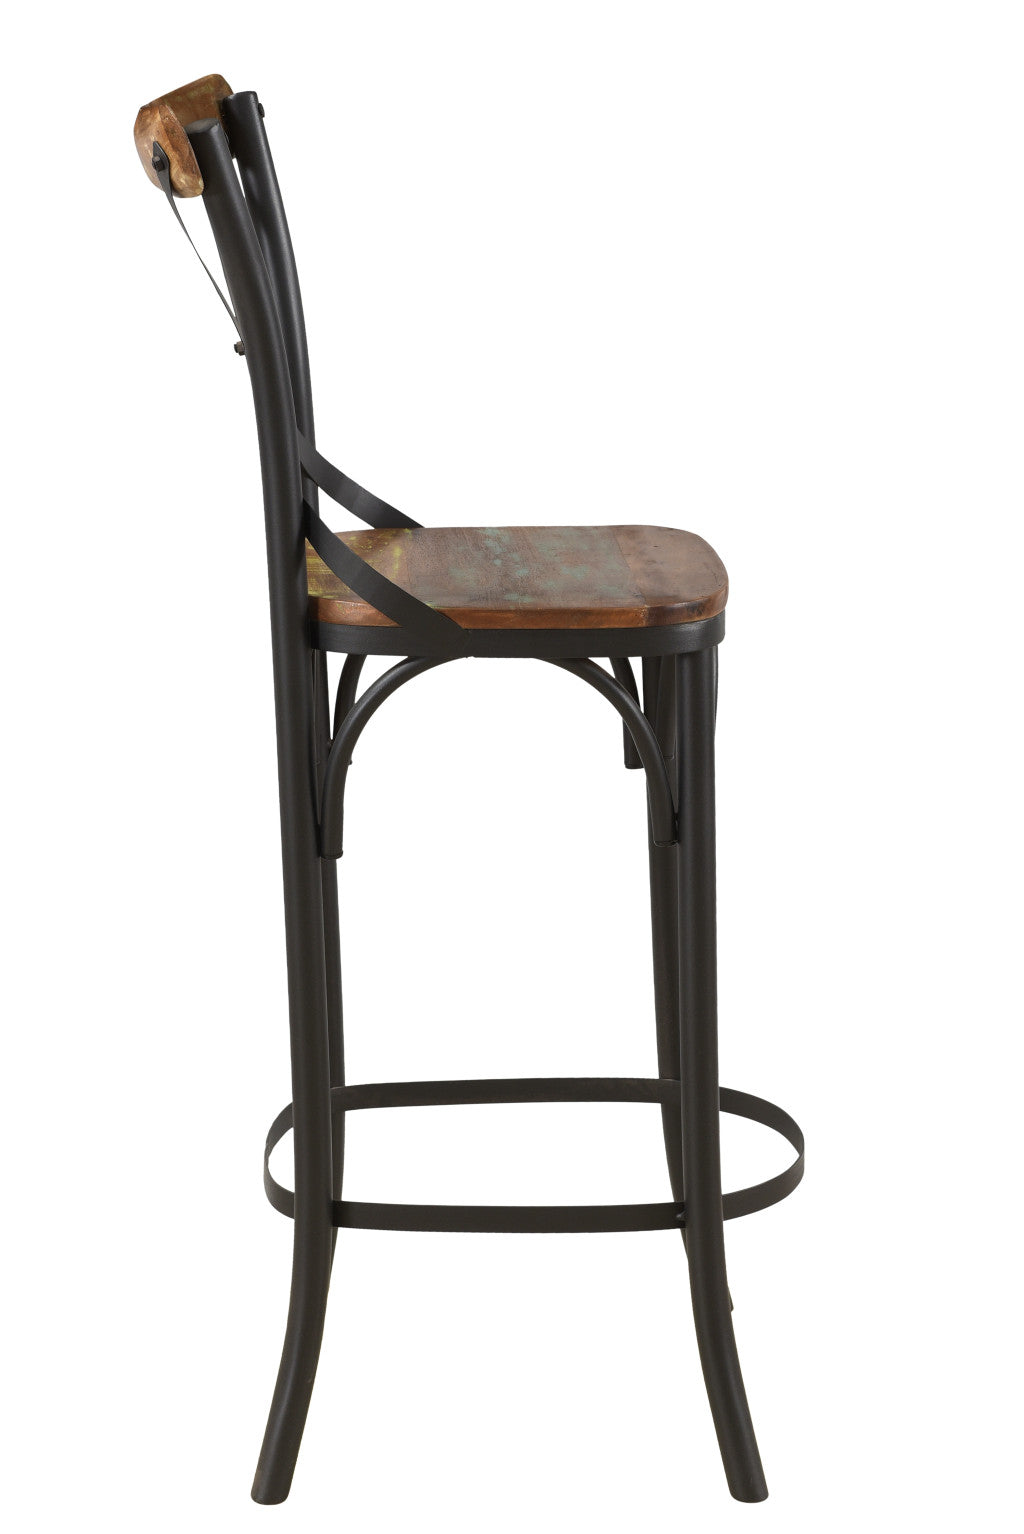 30" Brown And Black Metal Counter Height Bar Chair